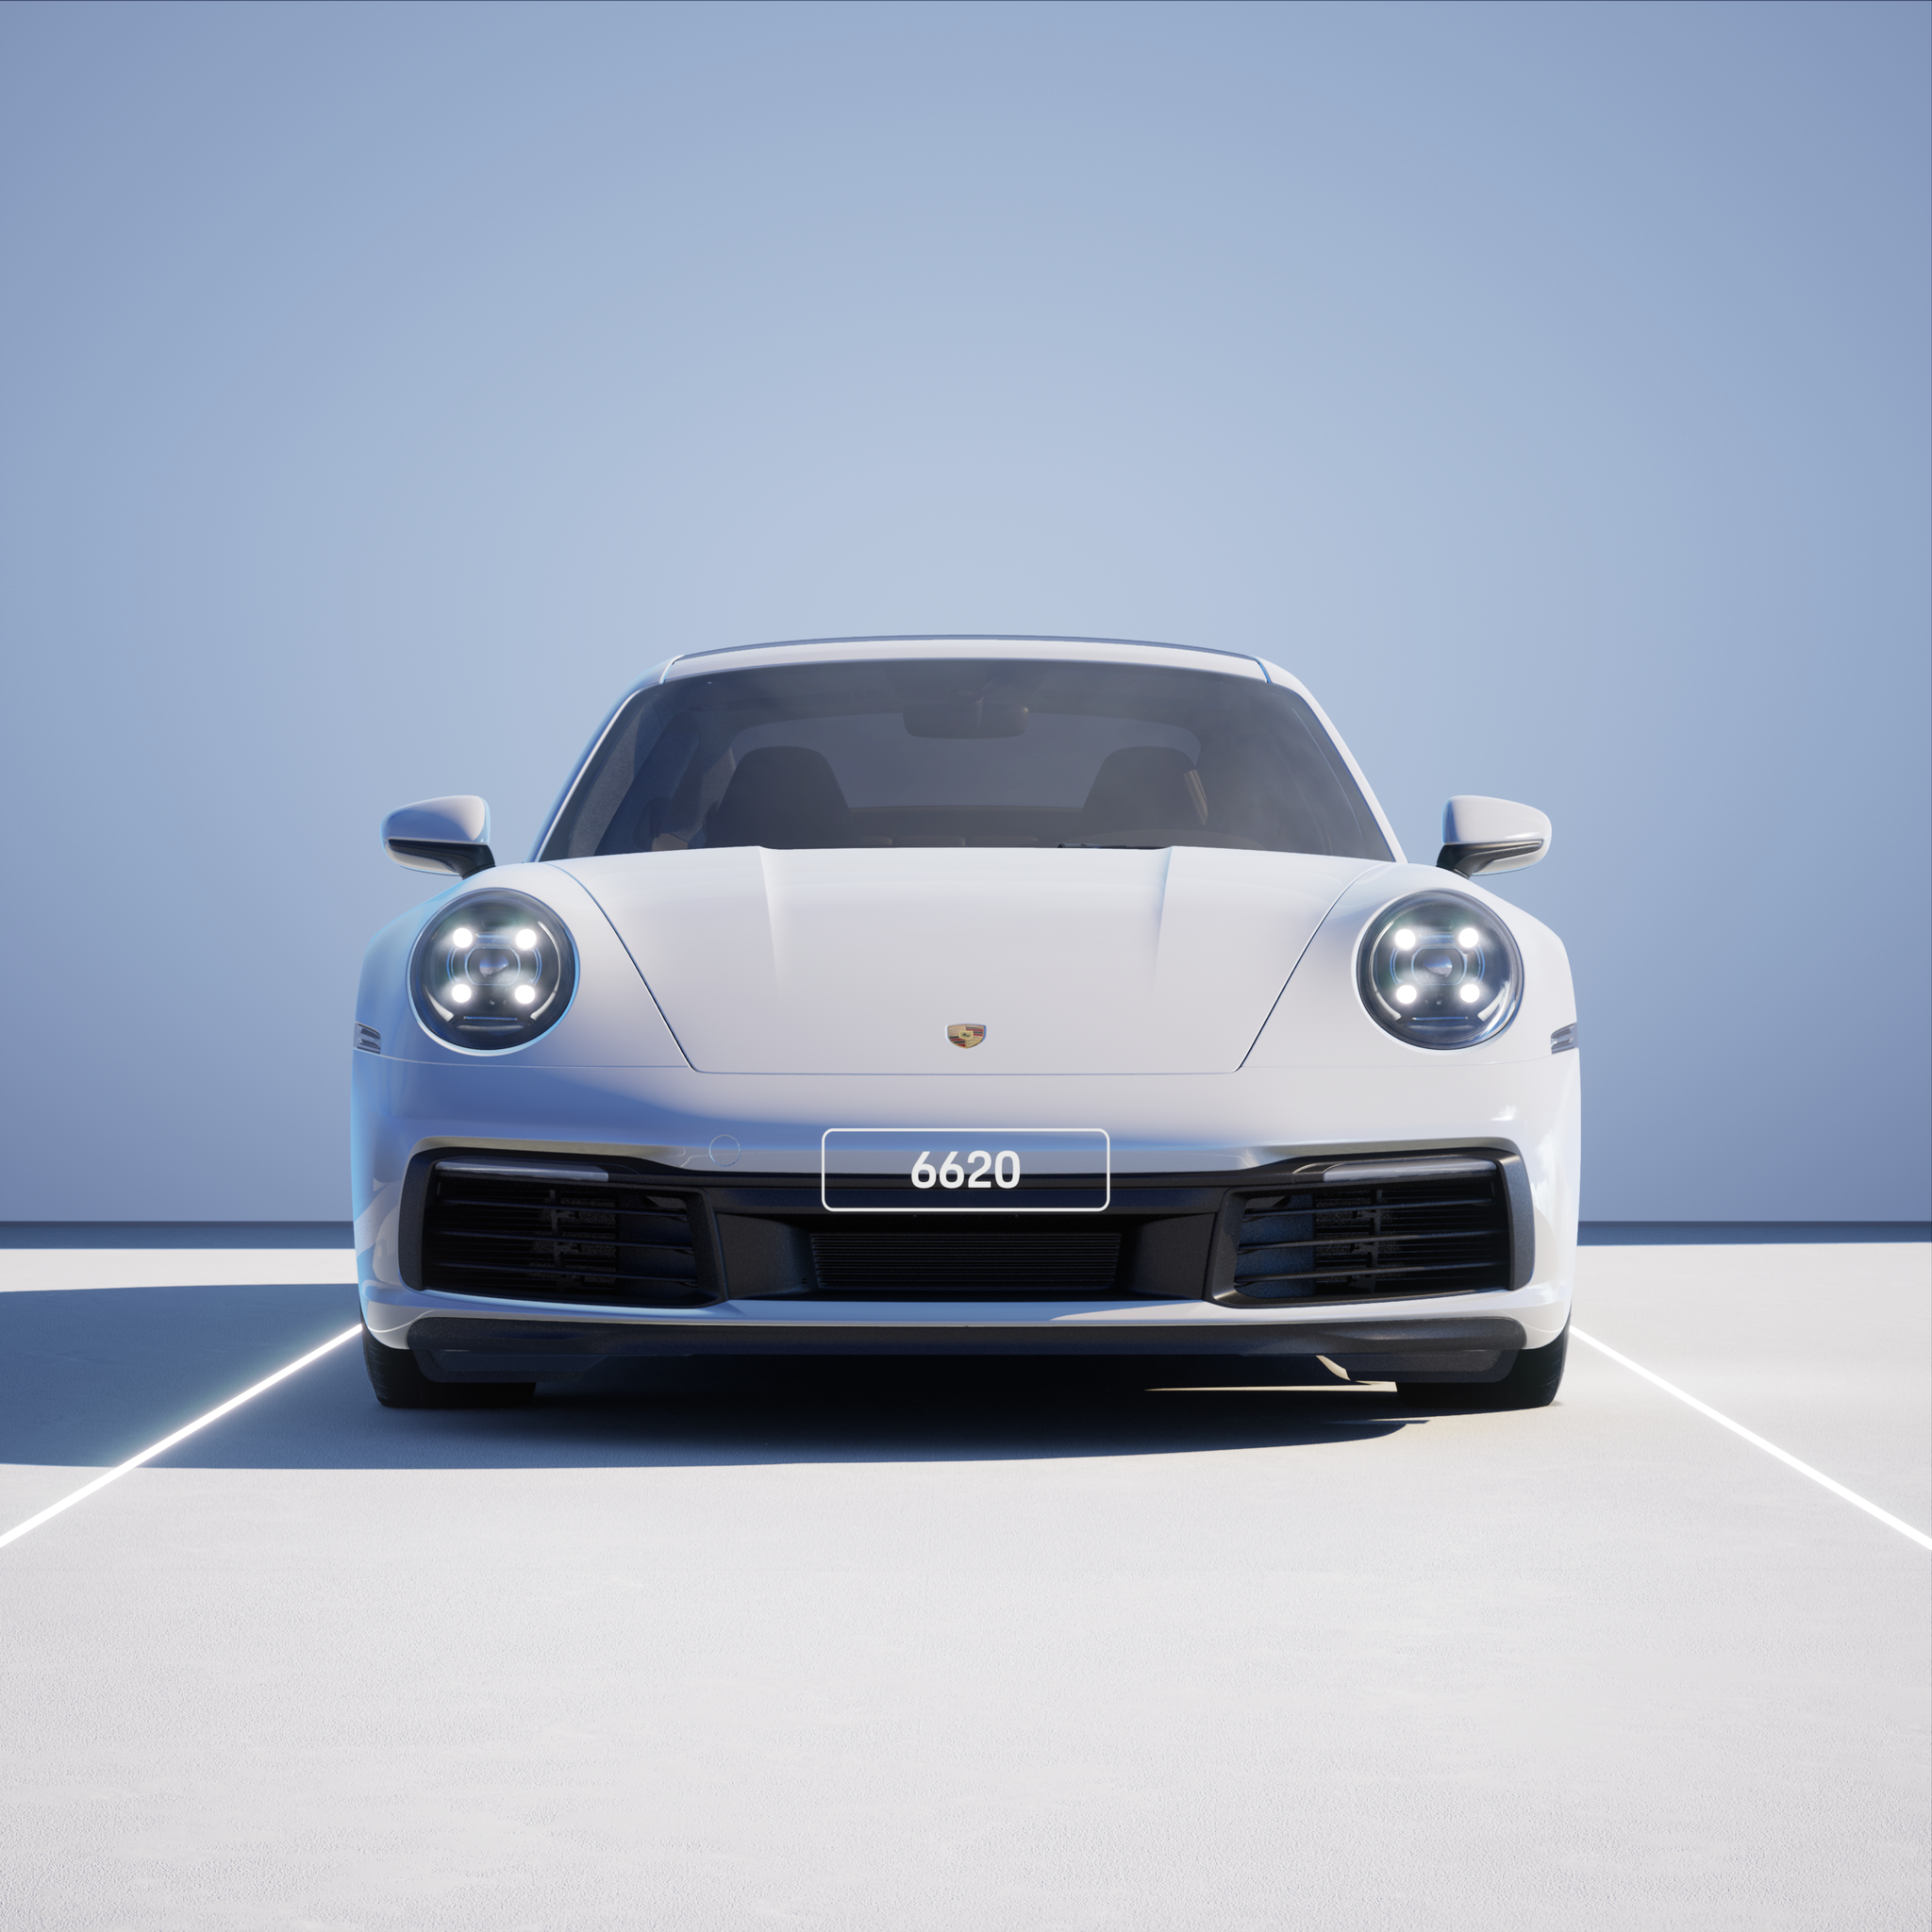 The PORSCHΞ 911 6620 image in phase